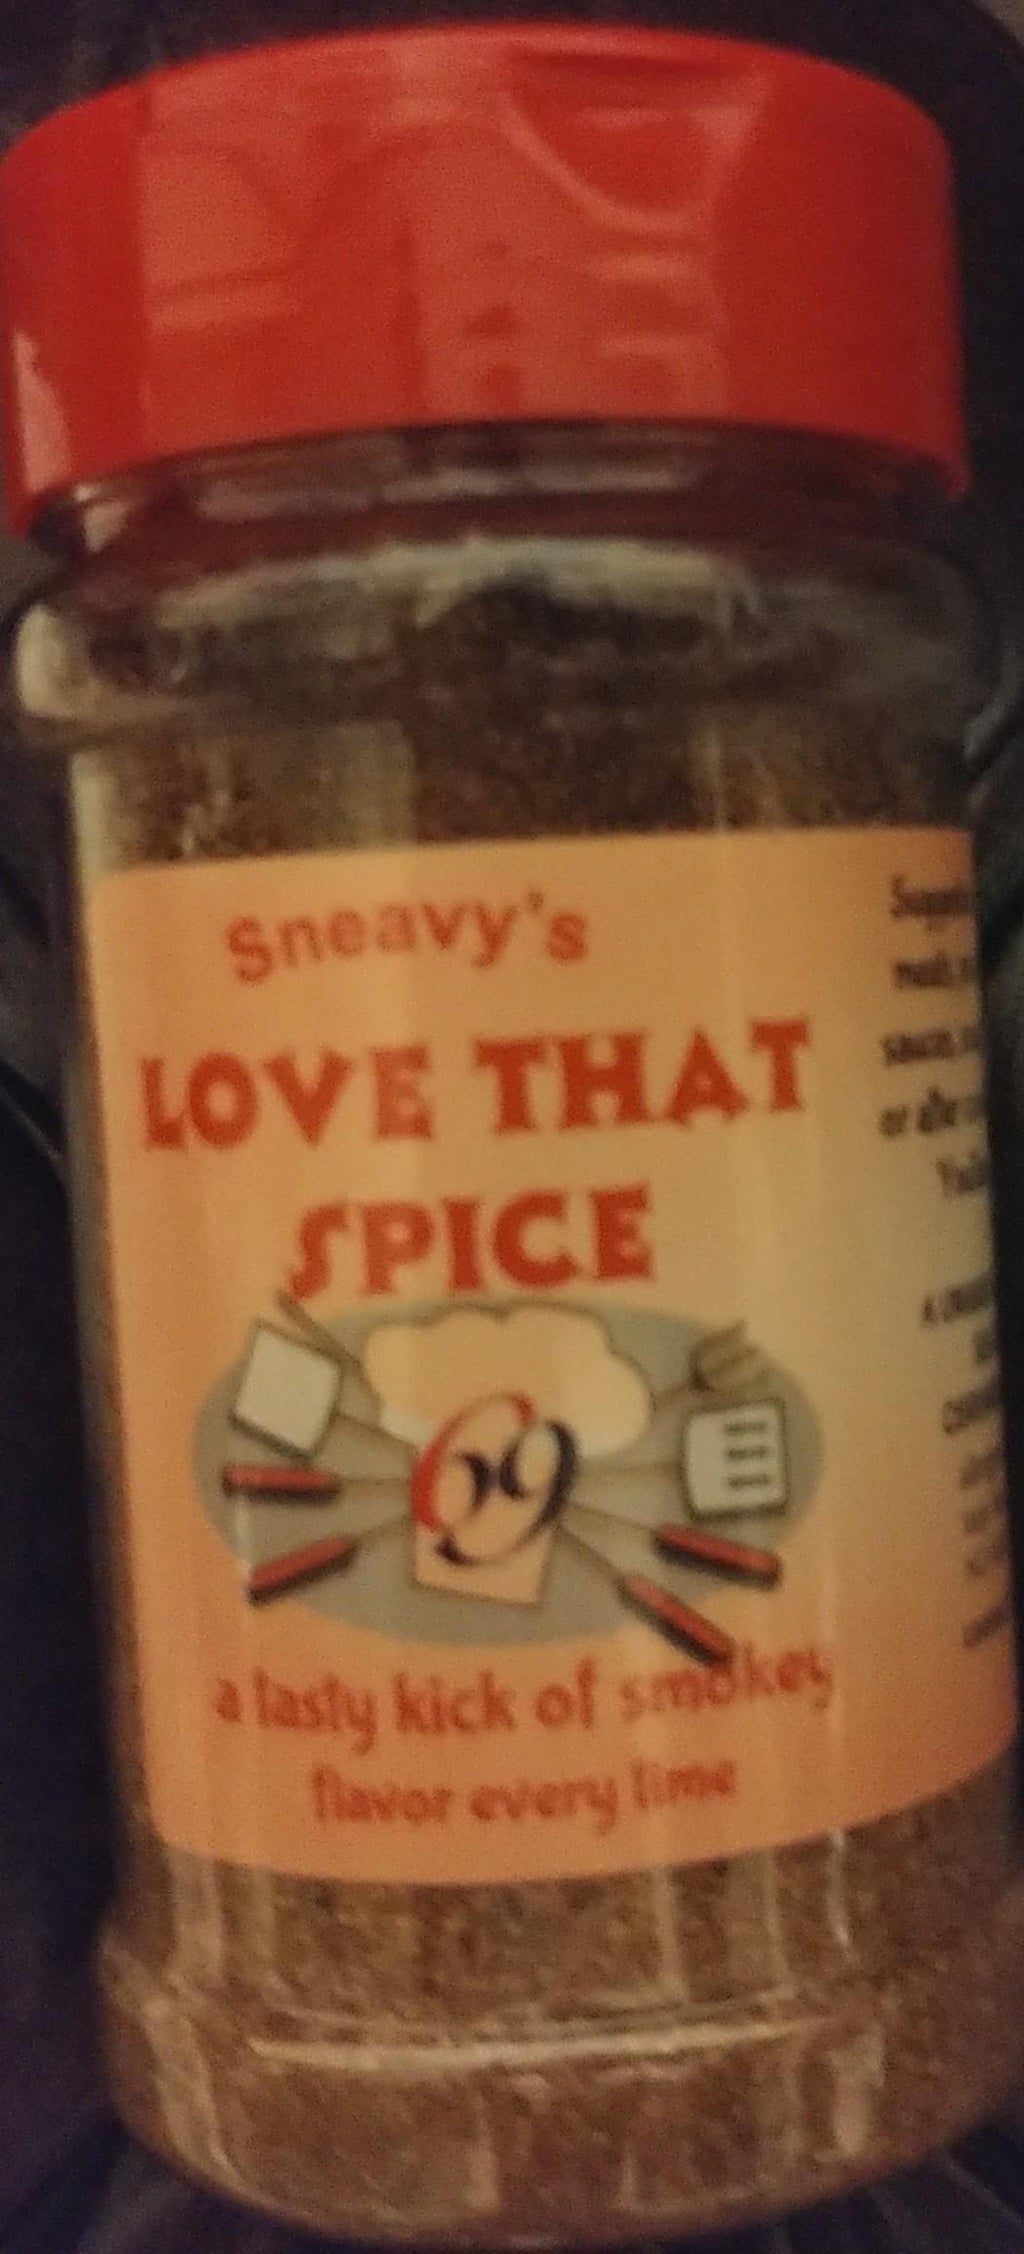 Sneavy's Love That Spice